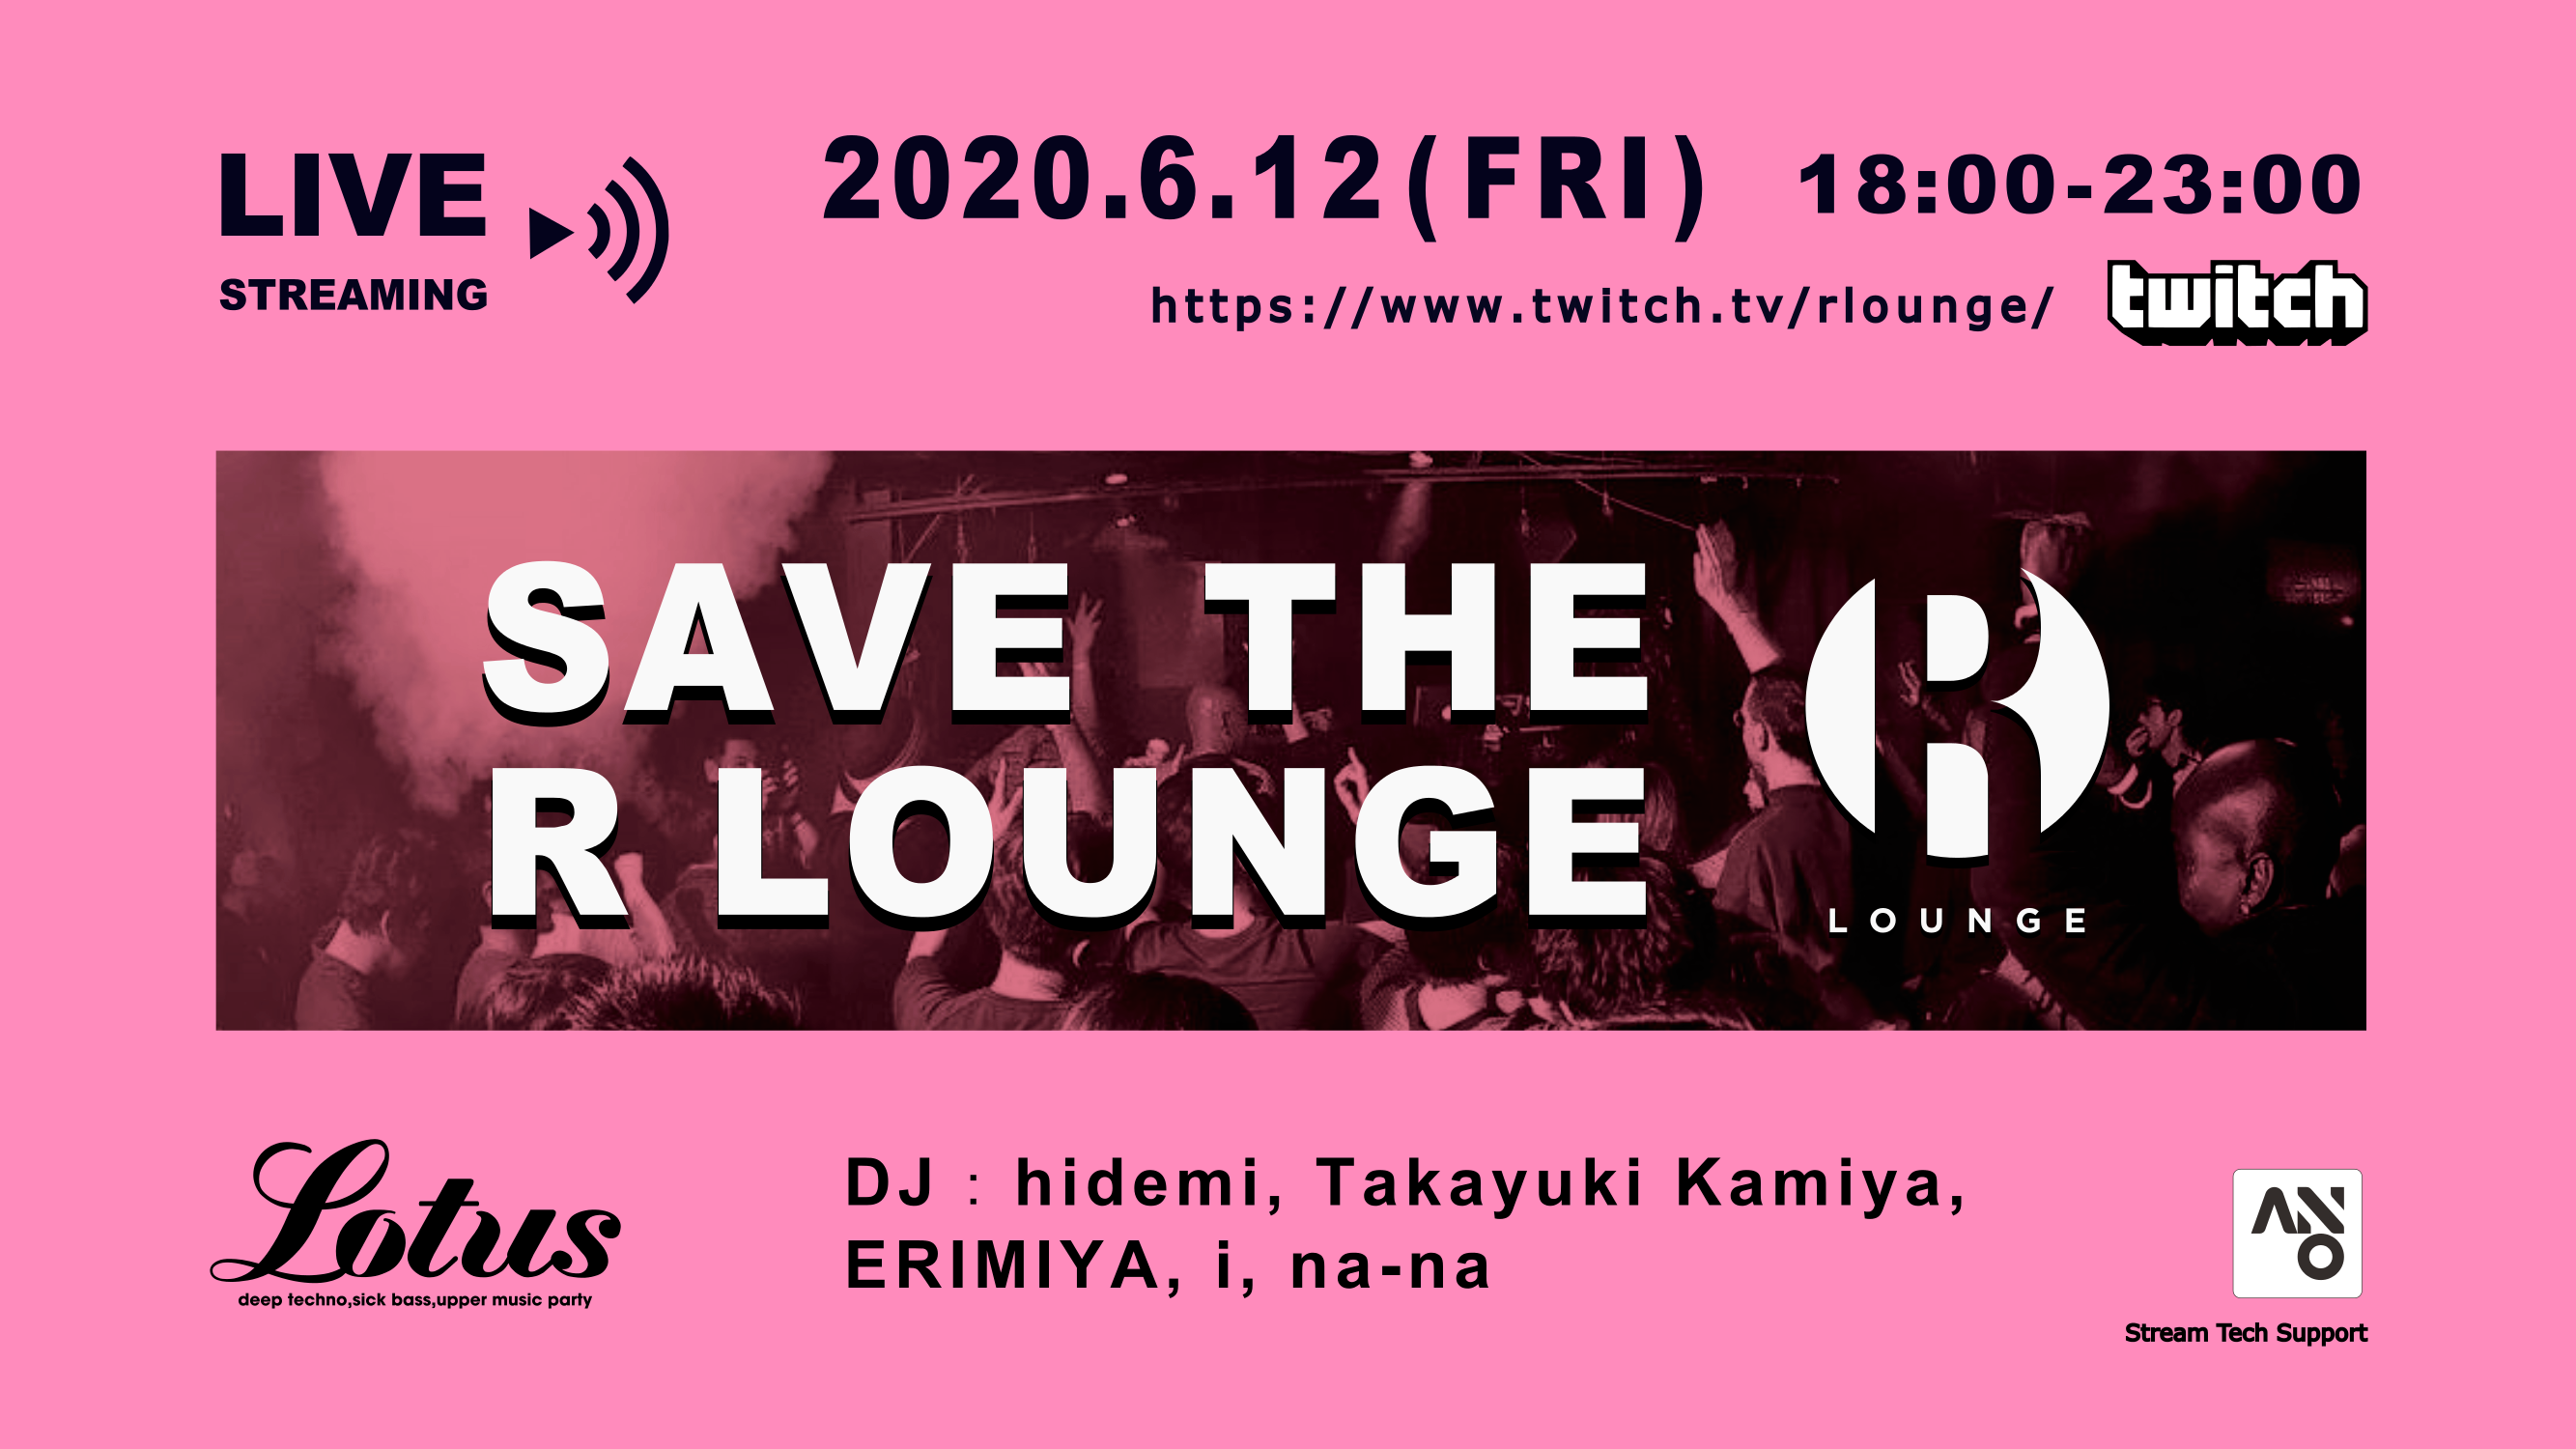 Live Streaming『SAVE R LOUNGE』